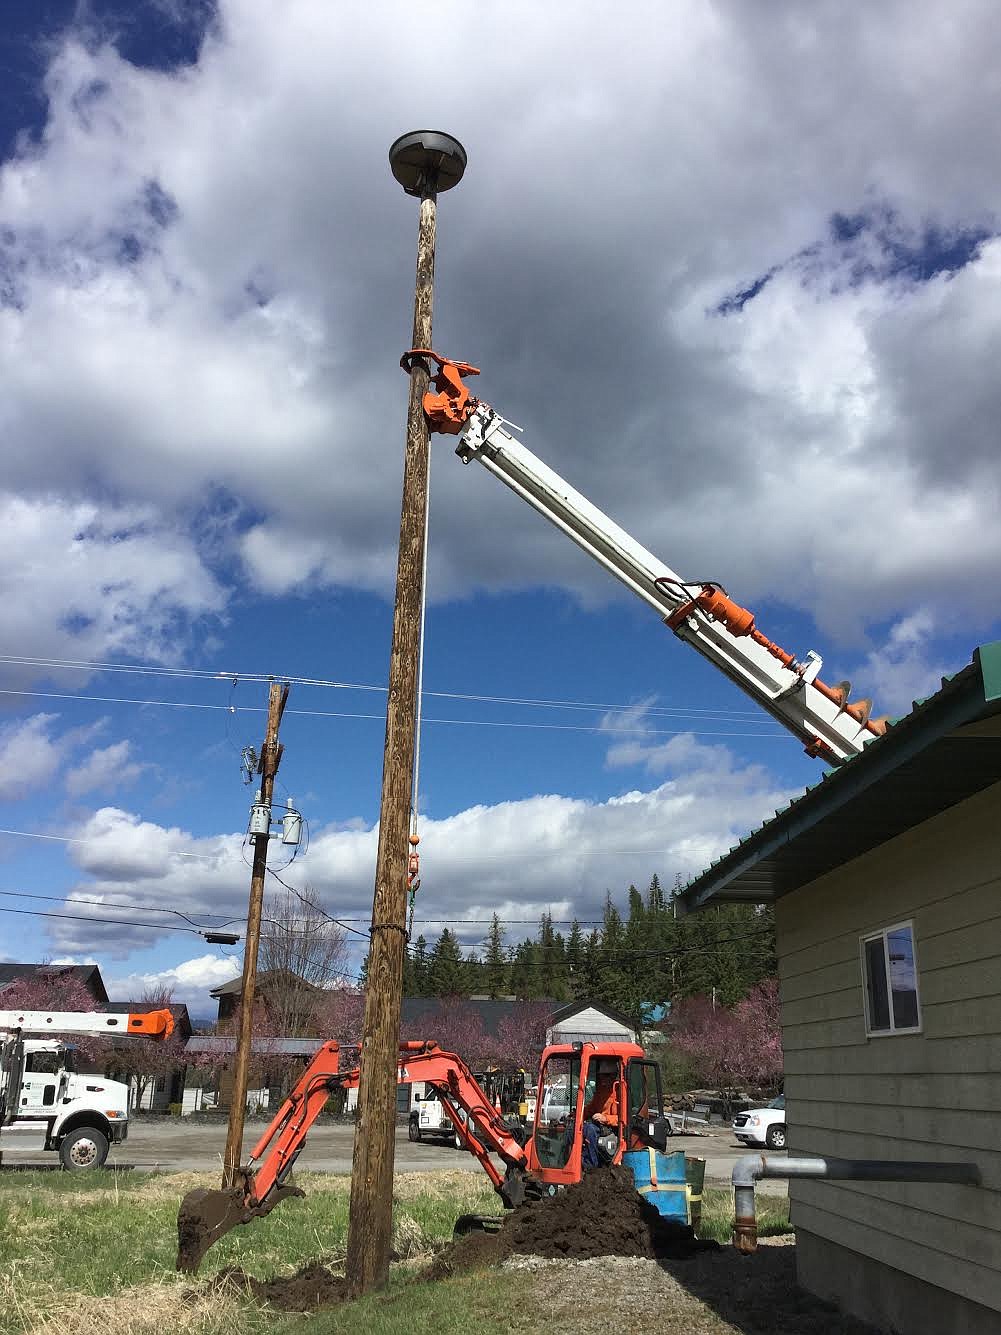 Kootenai Electric Cooperative workers installed an osprey nesting platform Thursday after a nest caused a pole-top fire and knocked out power Wednesday night in the Kidd Island Bay area. Neighbors (and birds) are pleased with KEC's work to keep the osprey safe. (Photo courtesy of Kootenai Electric Cooperative)